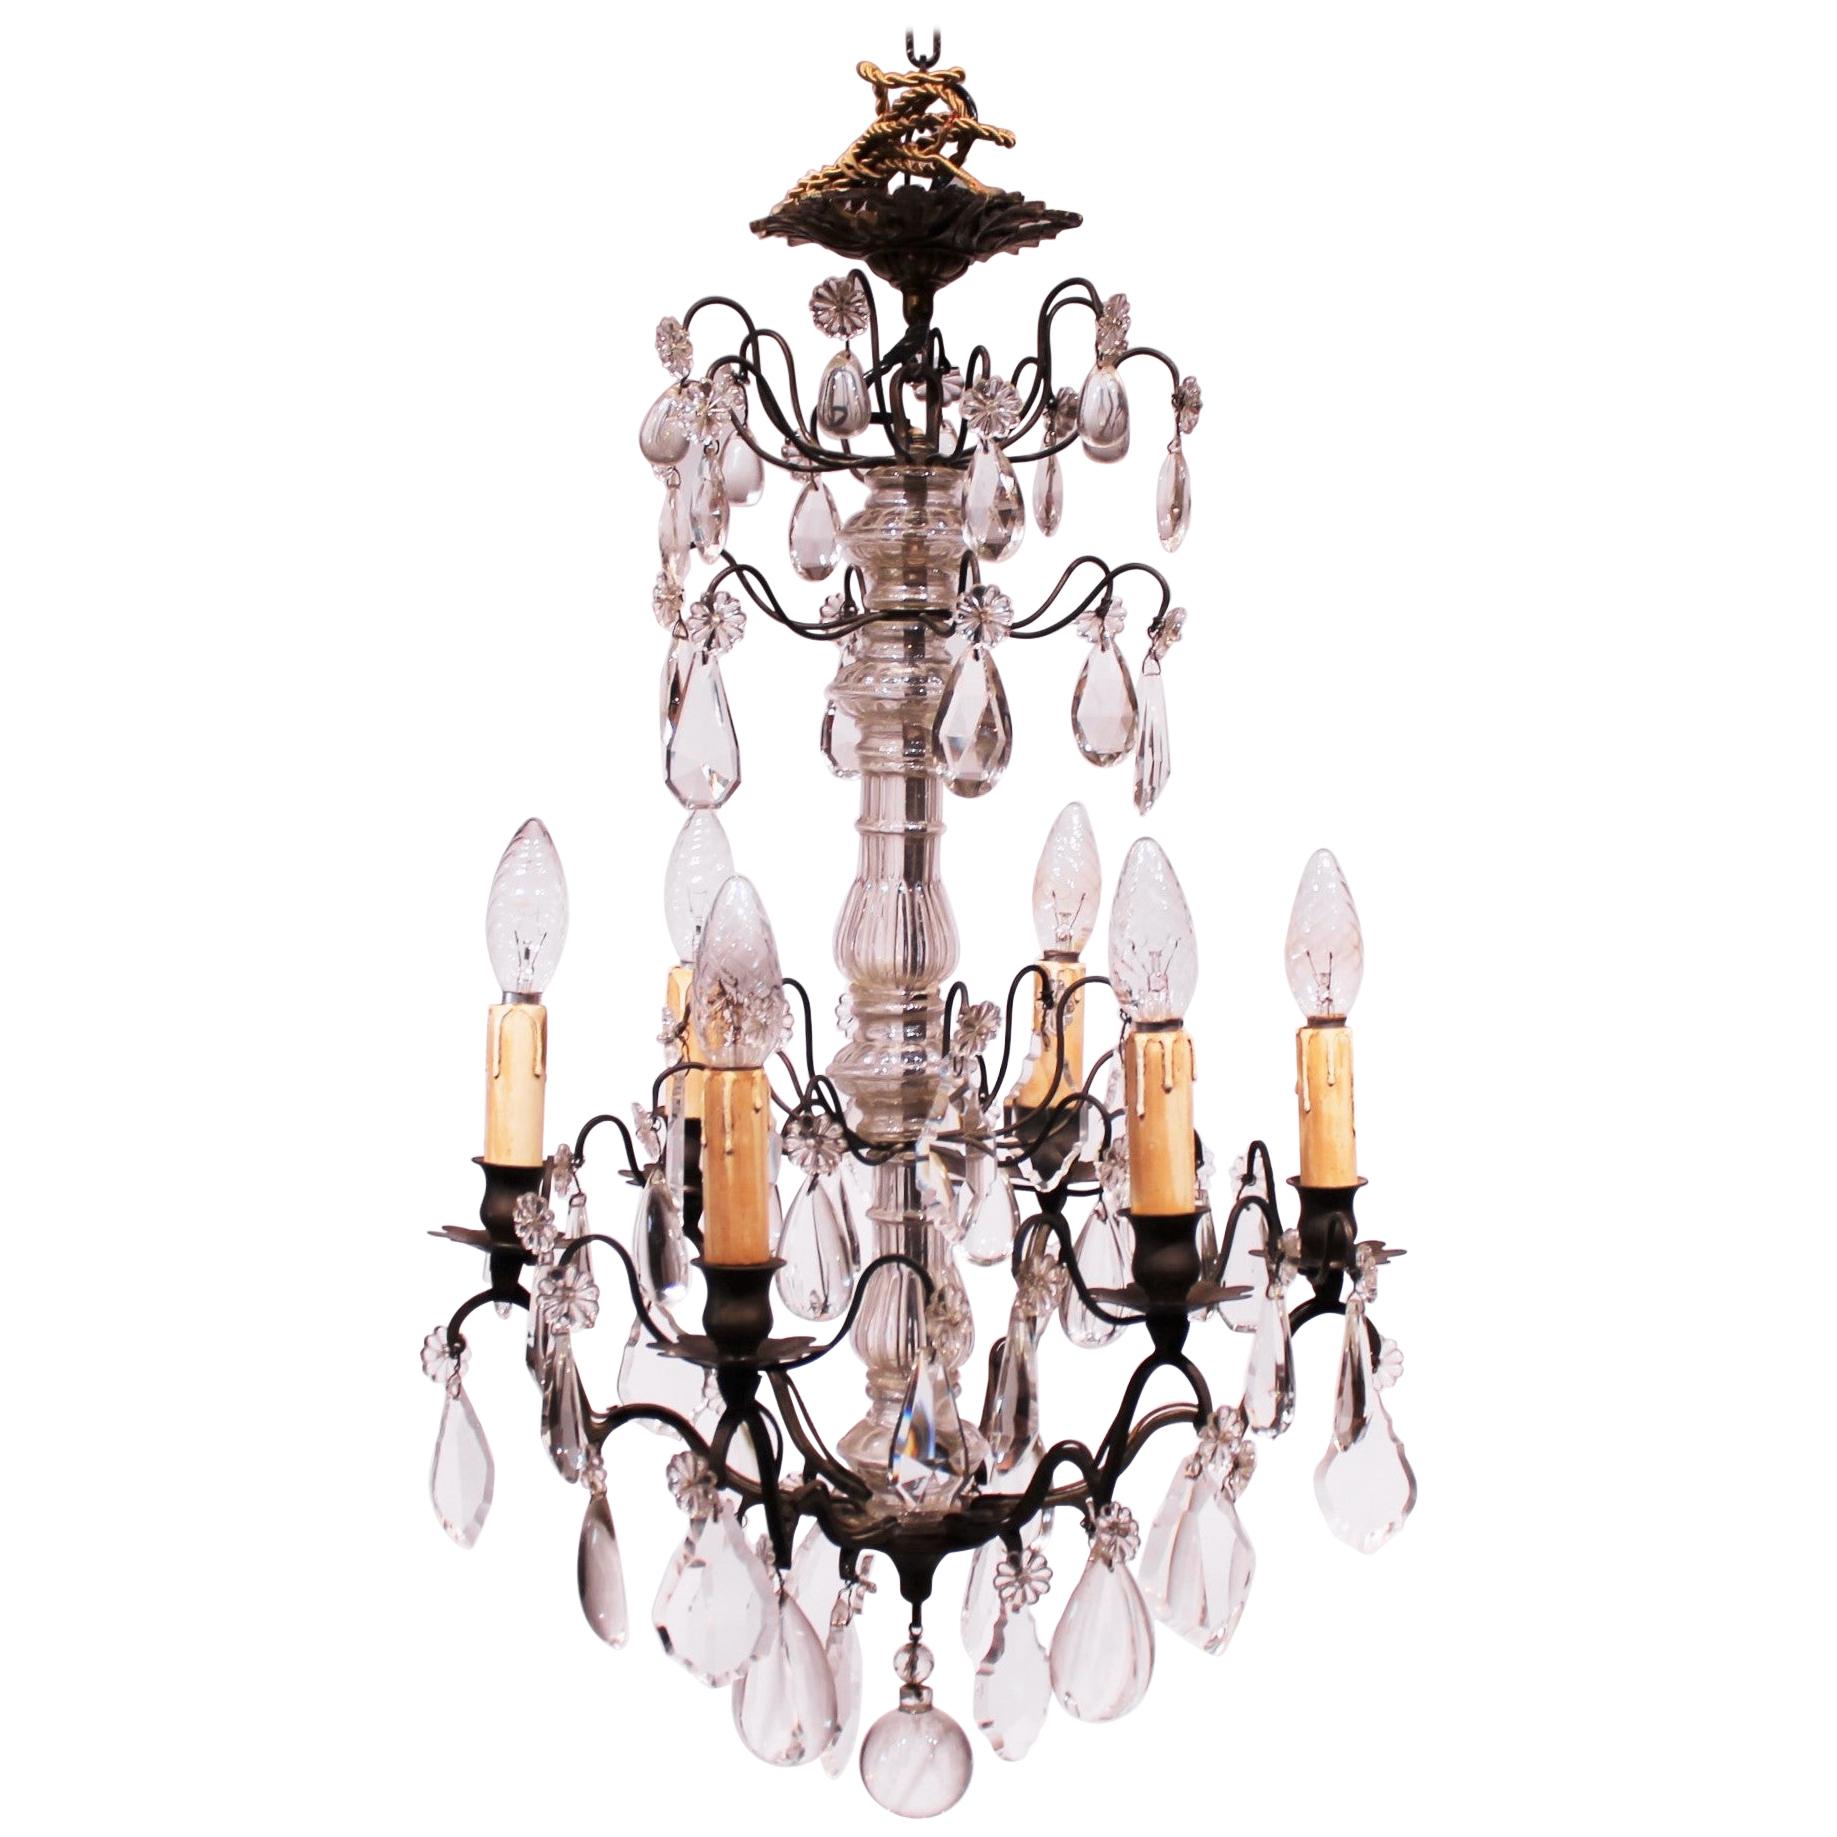 Chandelier of Brass and Polished Prisms from France, circa 1920s